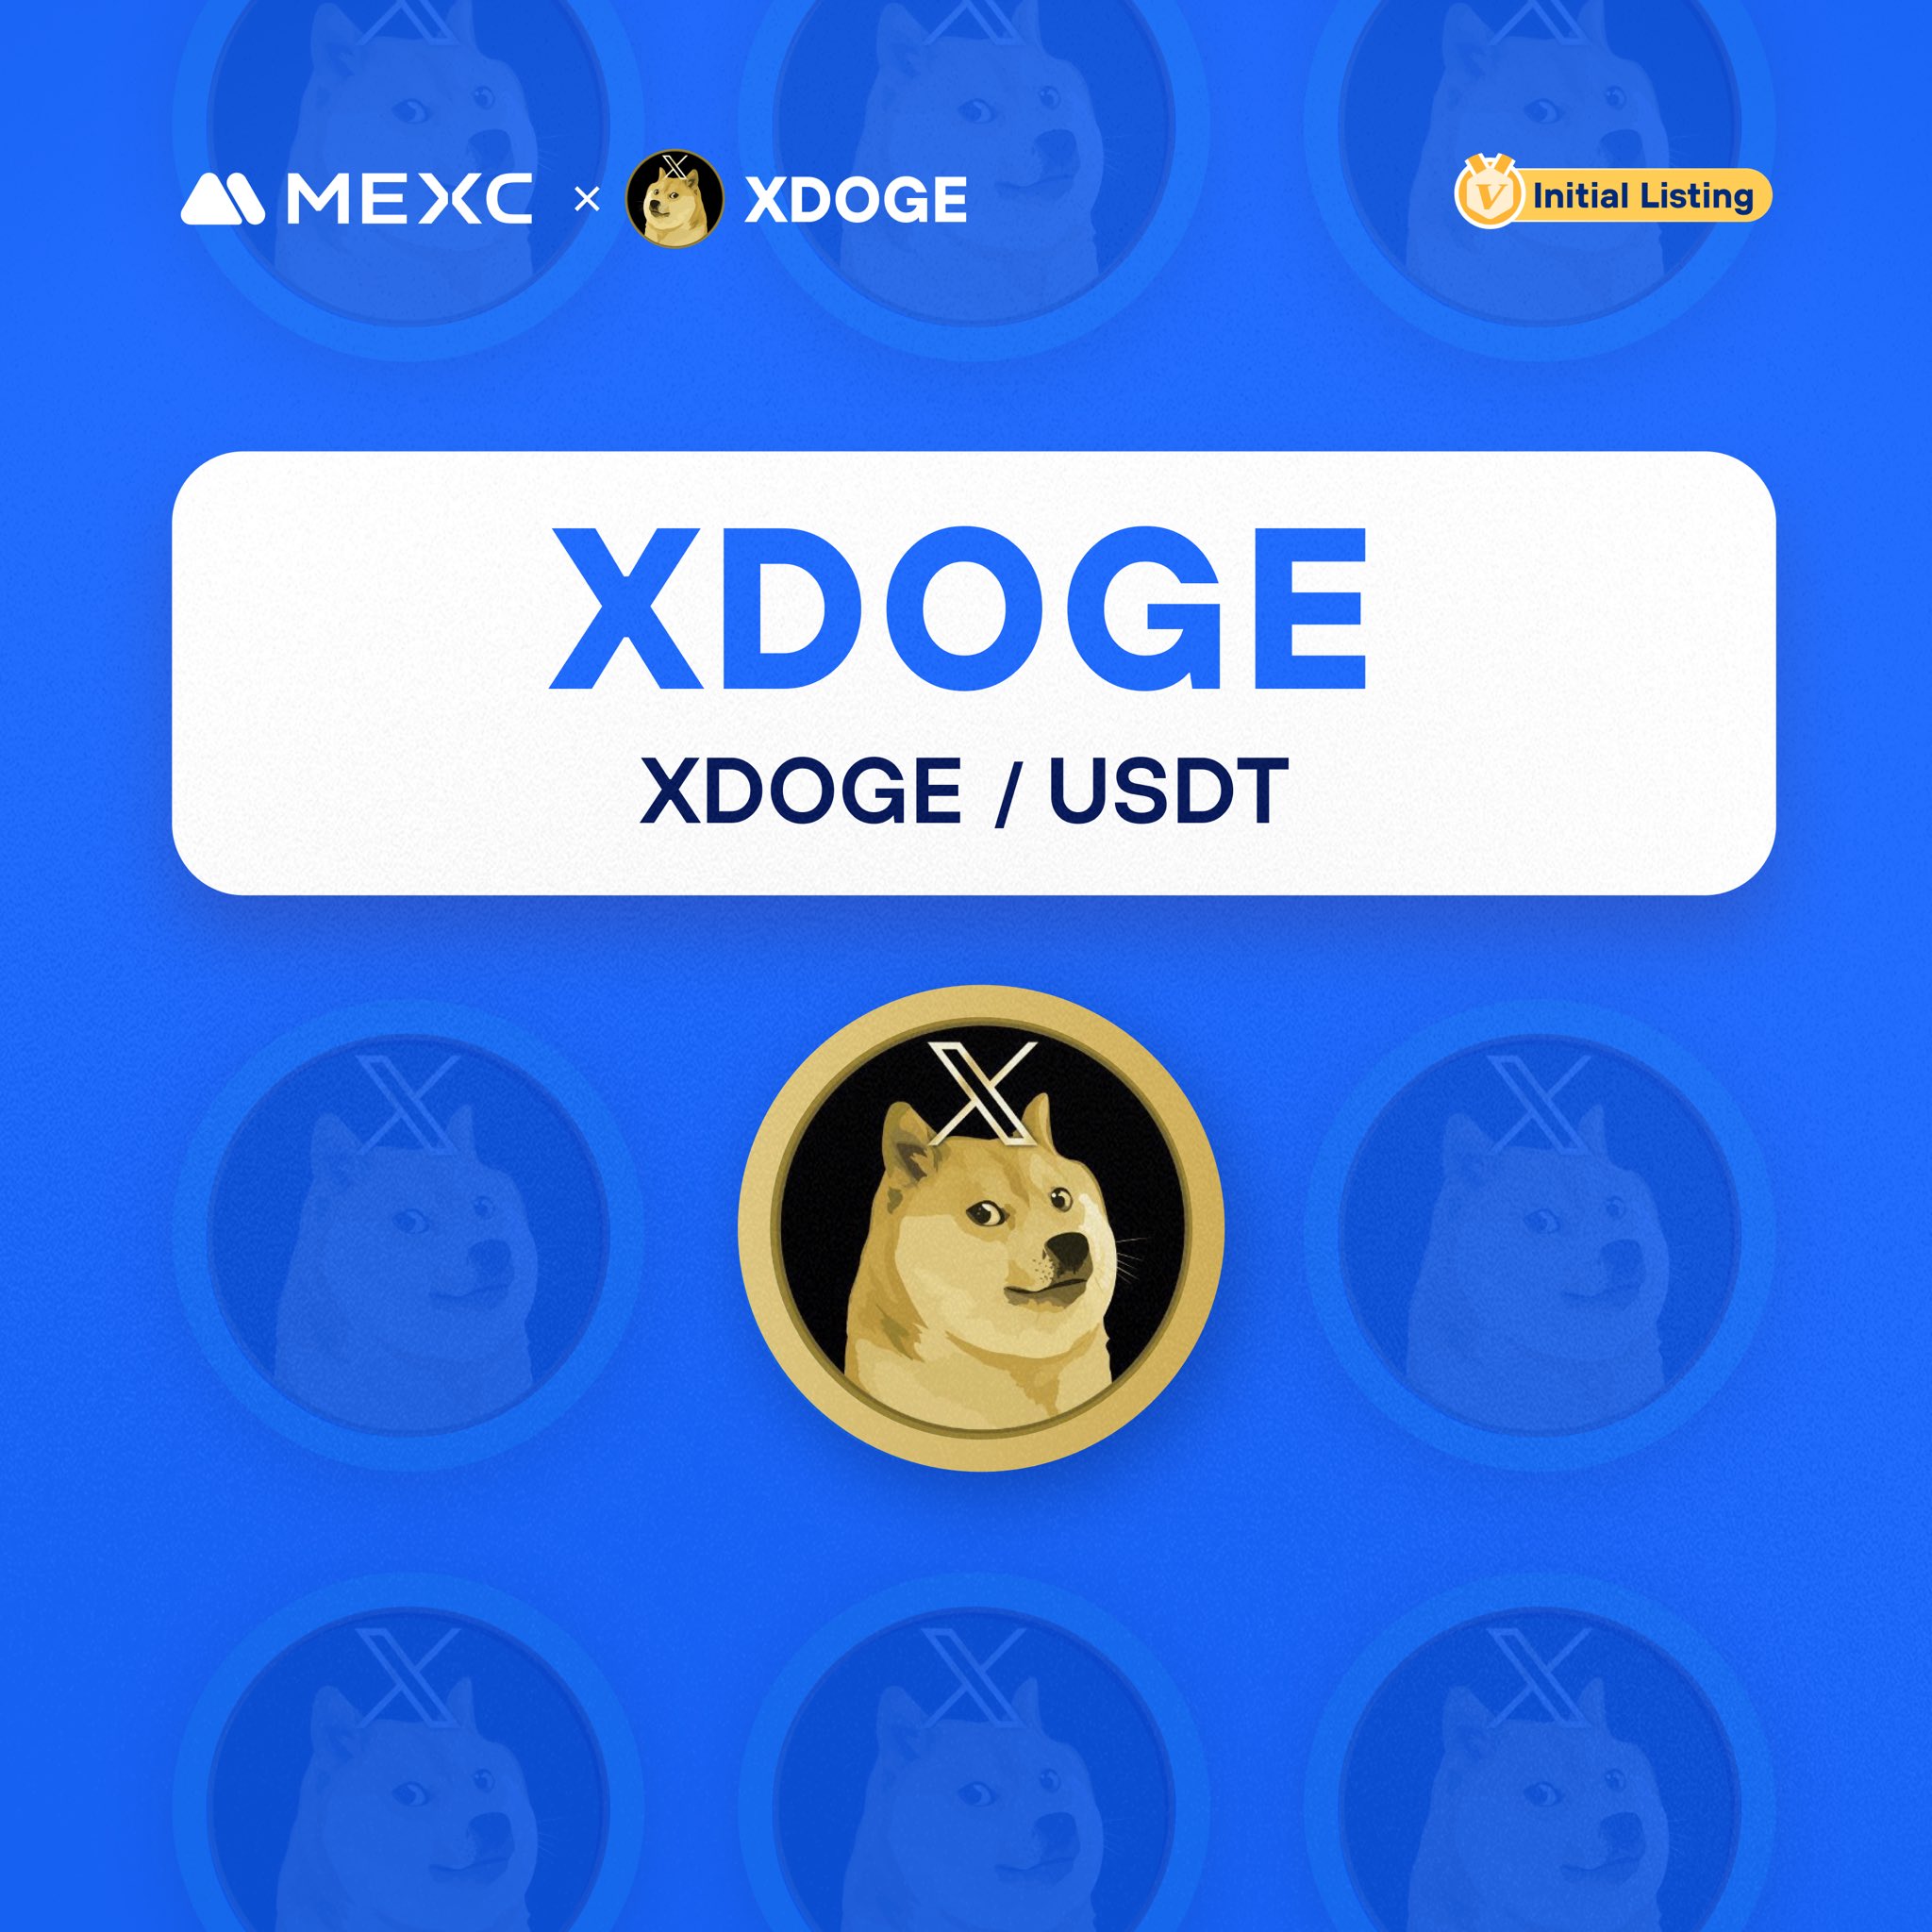 MEXC on X: Happy to announce that the @XDOGE_DOGE Kickstarter has  concluded and $XDOGE will list on #MEXC! 🔹Deposit: Opened 🔹XDOGEUSDT  Trading: Nov 5, 09:00 (UTC) Details: t.co3jZ58QY9UH  t.coJxD03LUp1O  X